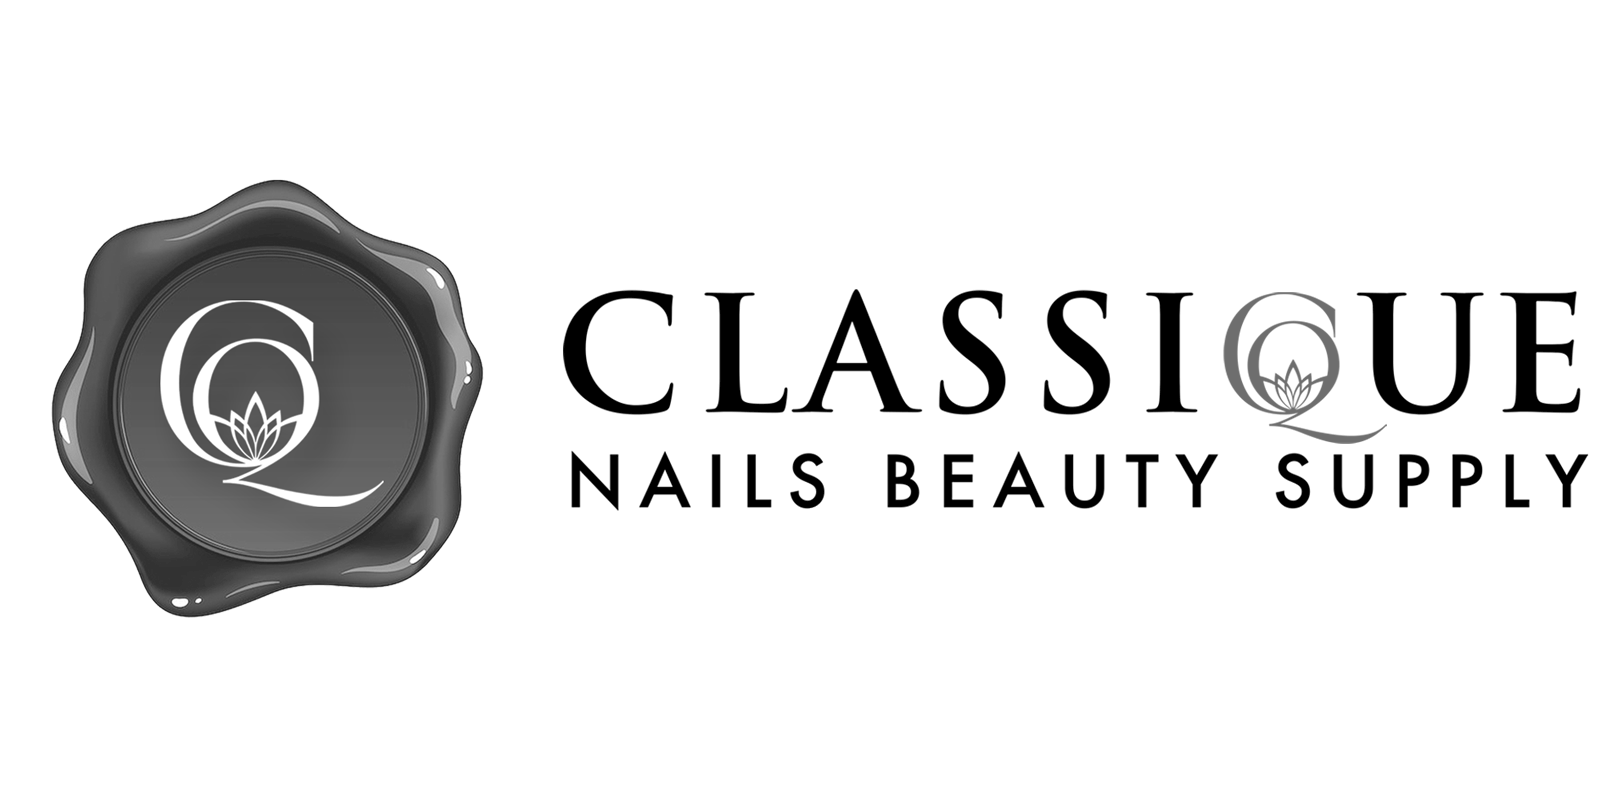 Shop Nail Sticker Brand Logo with great discounts and prices